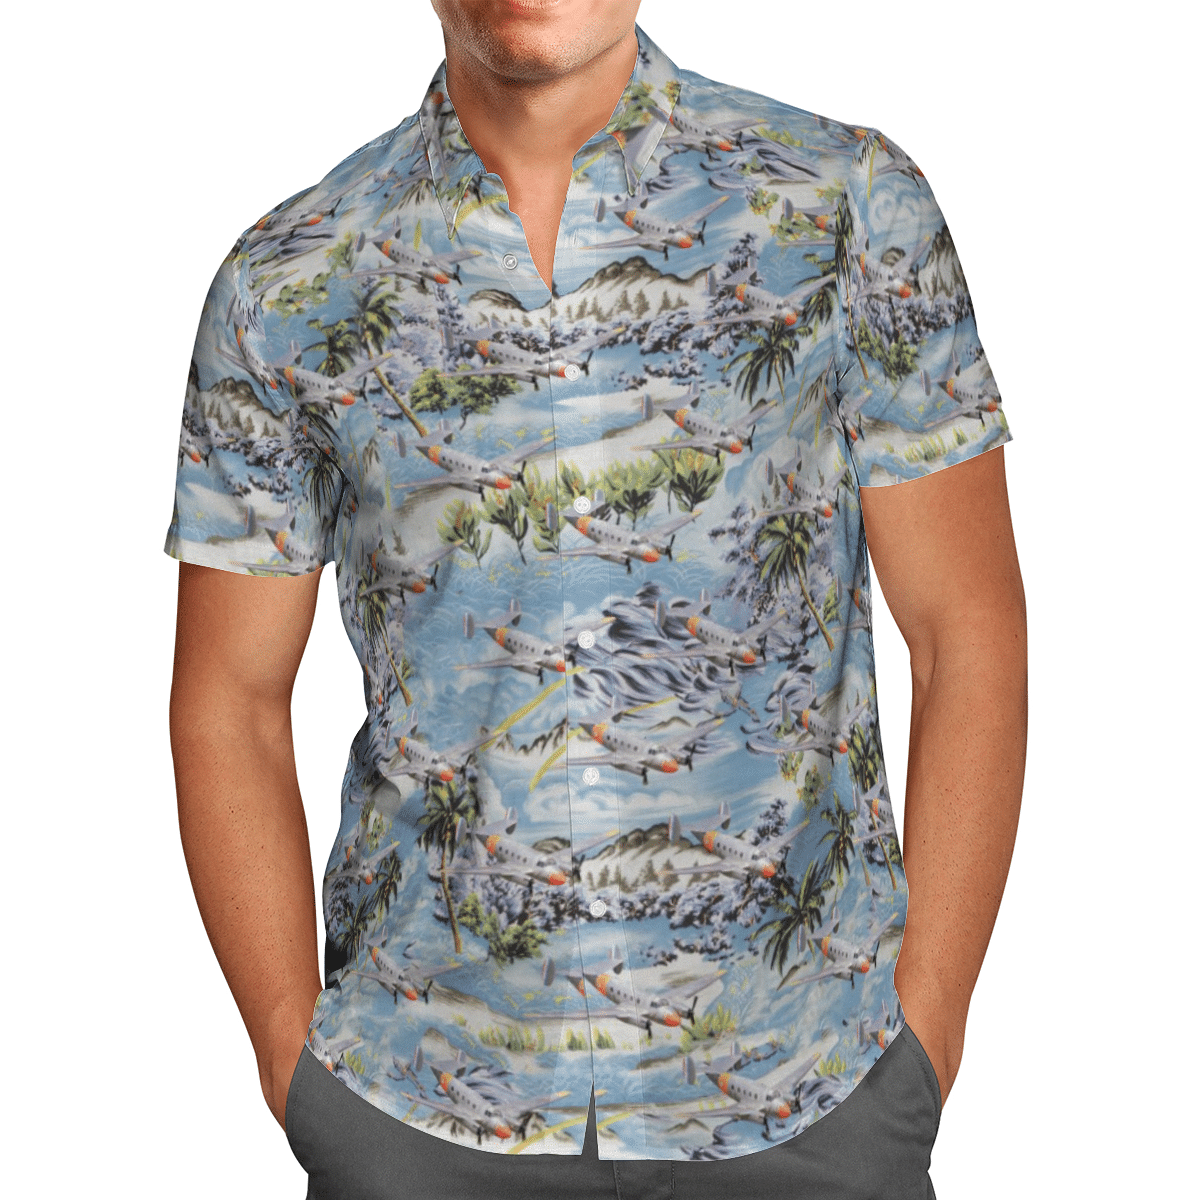 HOT Dassault MD 315 Flamant France All Over Print Tropical Shirt1